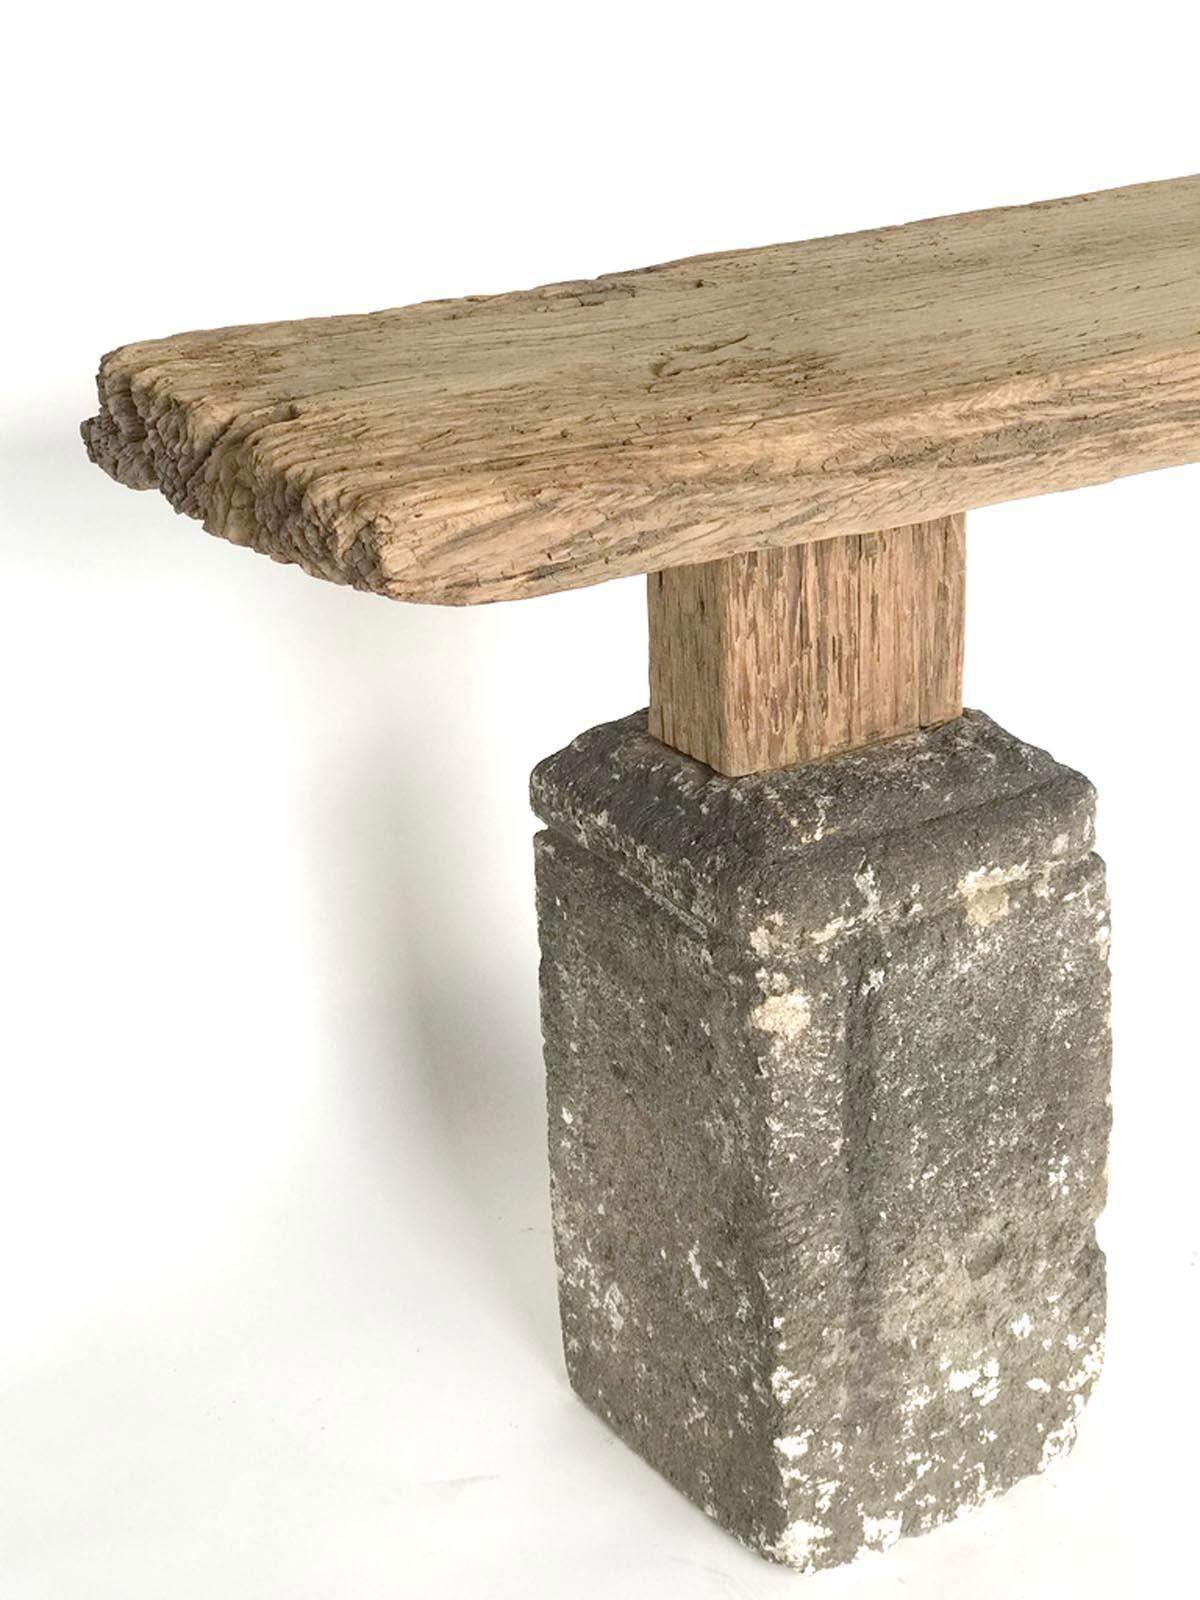 Rustic modern console table consisting of weathered 2.5 inch thick Japanese Elm board atop a pair of 19th century Guatemalan carved stone bases. Naturally worn patina.